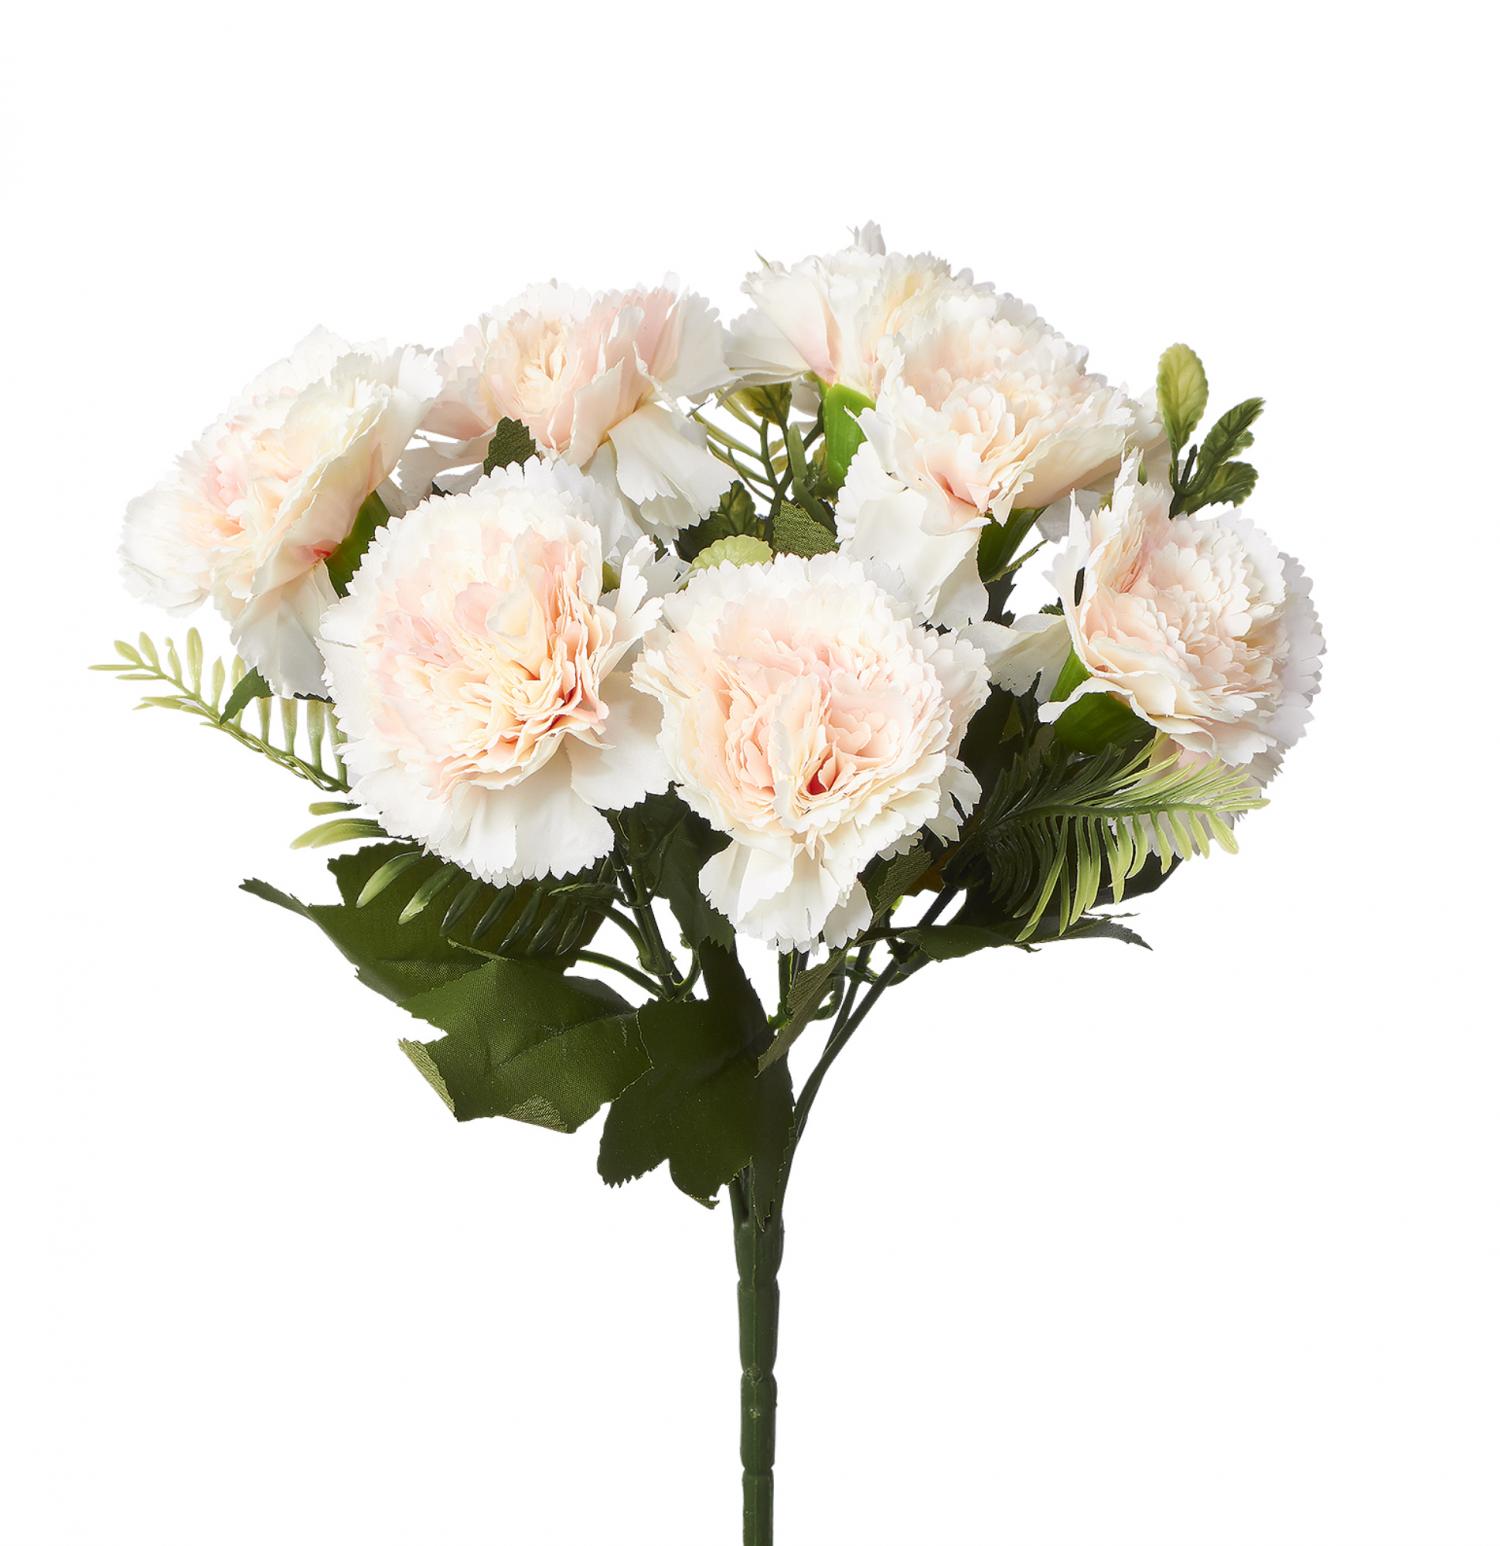 The Lovely Carnation - January's Birth Flower - Cascade Floral Wholesale